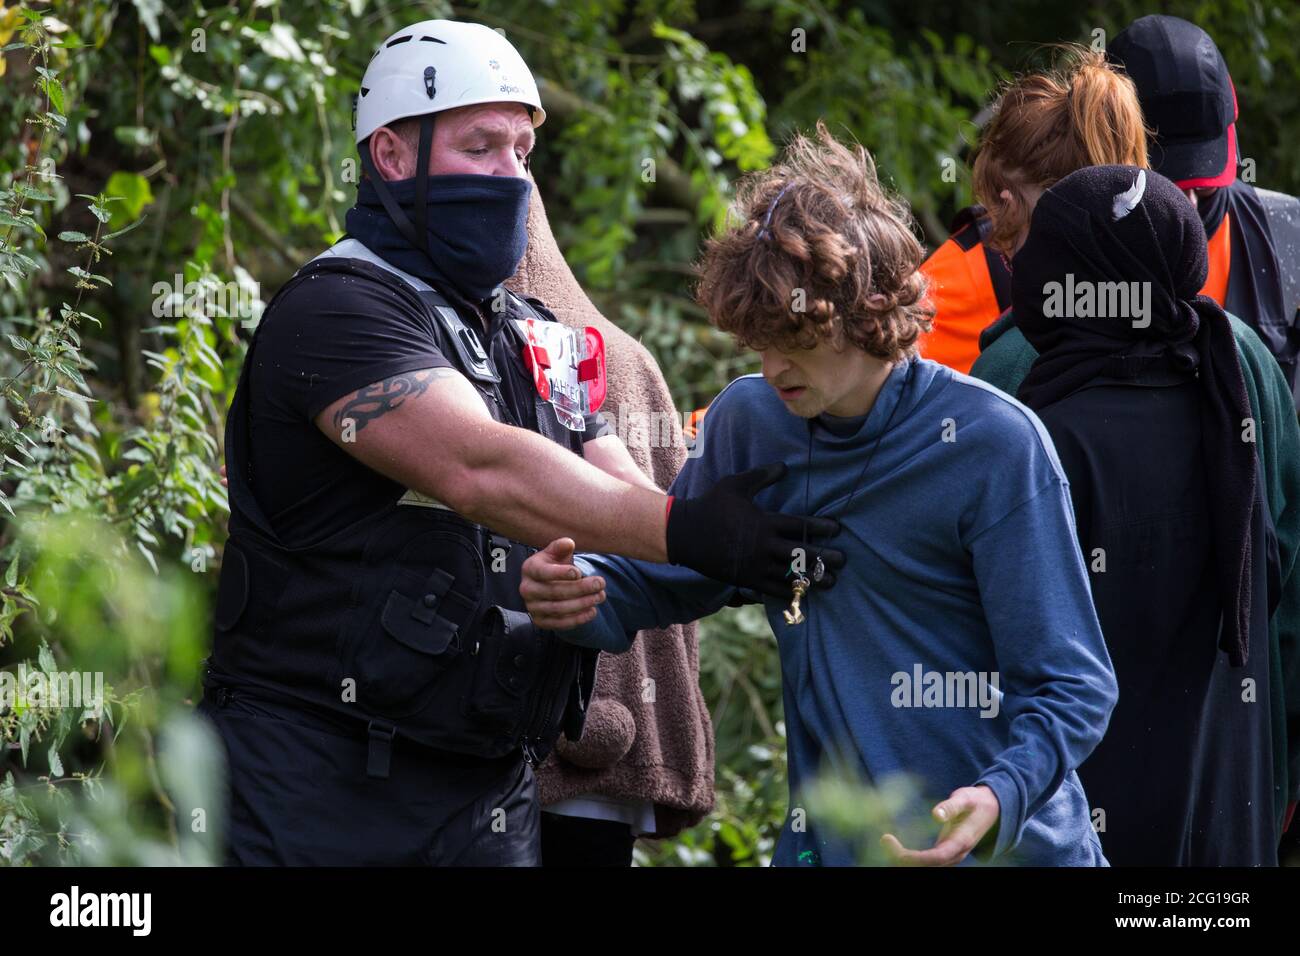 Denham, UK. 7th September, 2020. National Eviction Team enforcement agents try to prevent activists from HS2 Rebellion from interrupting tree cutting in conjunction with the HS2 high-speed rail link in Denham Country Park. Anti-HS2 activists continue to try to prevent or delay works on the controversial £106bn project for which the construction phase was announced on 4th September from a series of protection camps based along the route of the line between London and Birmingham. Credit: Mark Kerrison/Alamy Live News Stock Photo